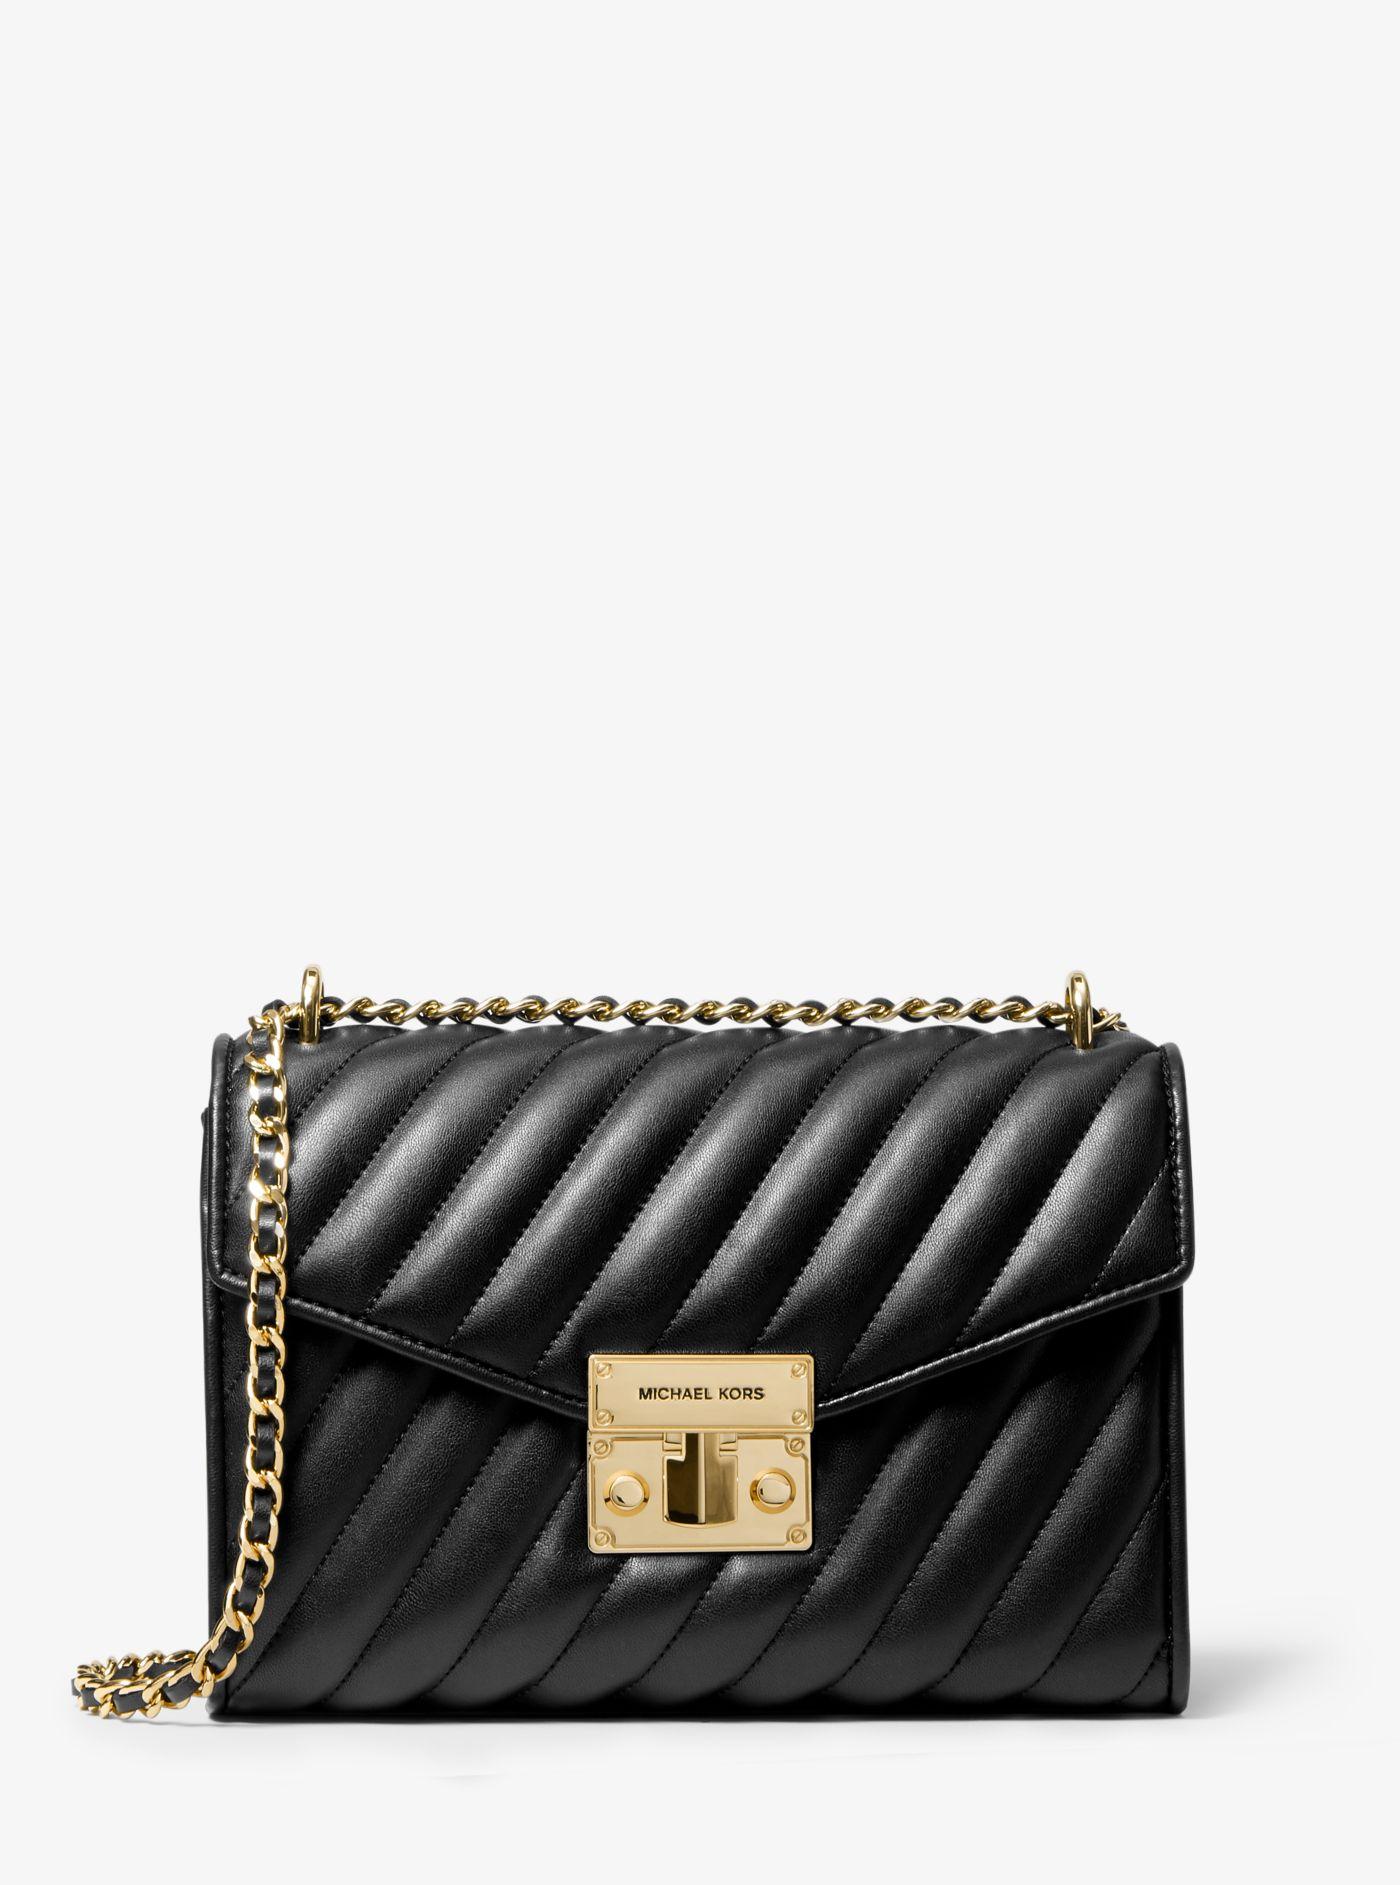 MK quilted bag